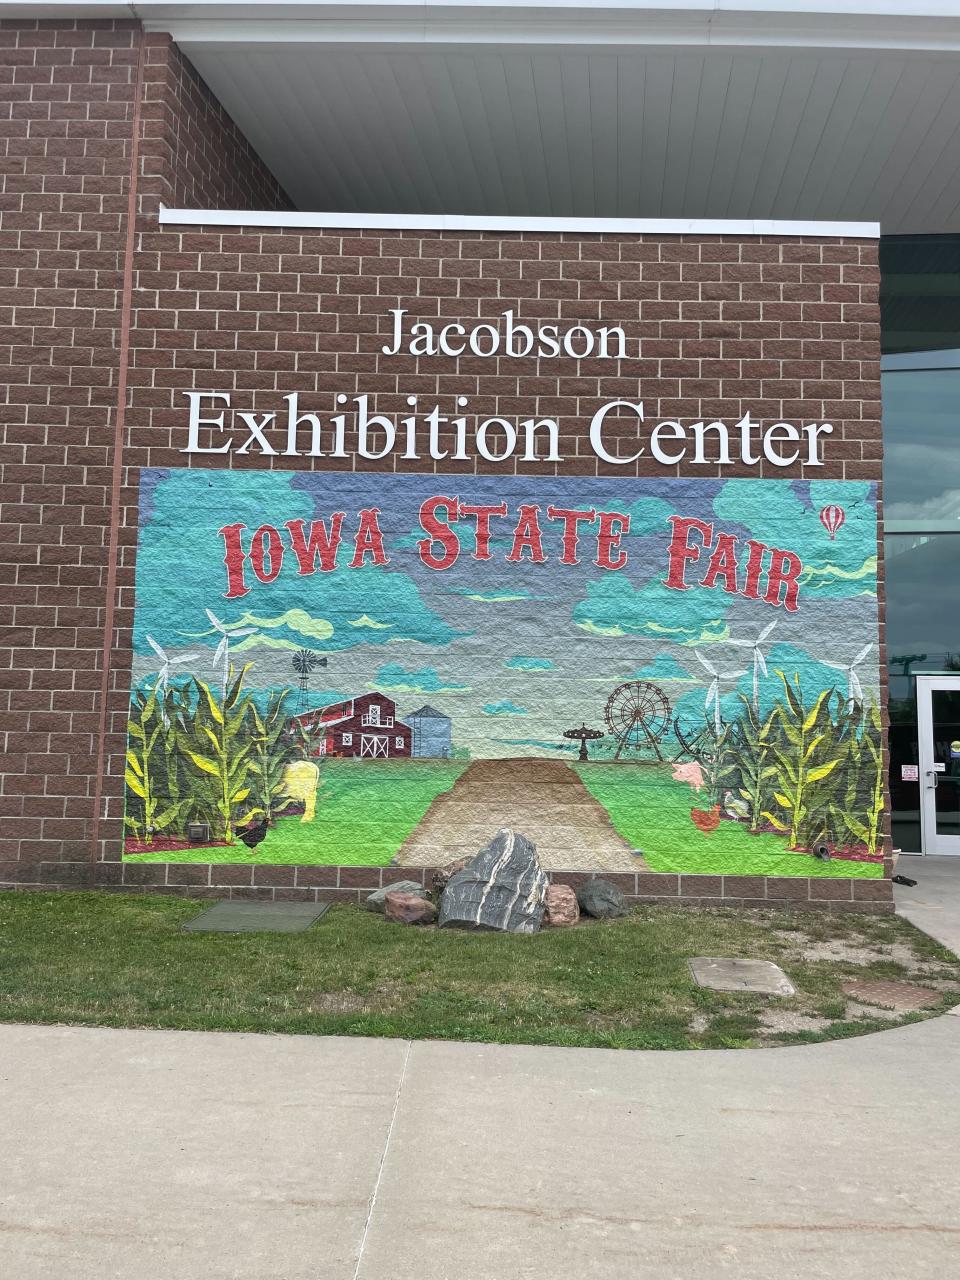 Snap a QR code next to this mural at the Iowa State Fair to see it turn into a 3-D piece of art.